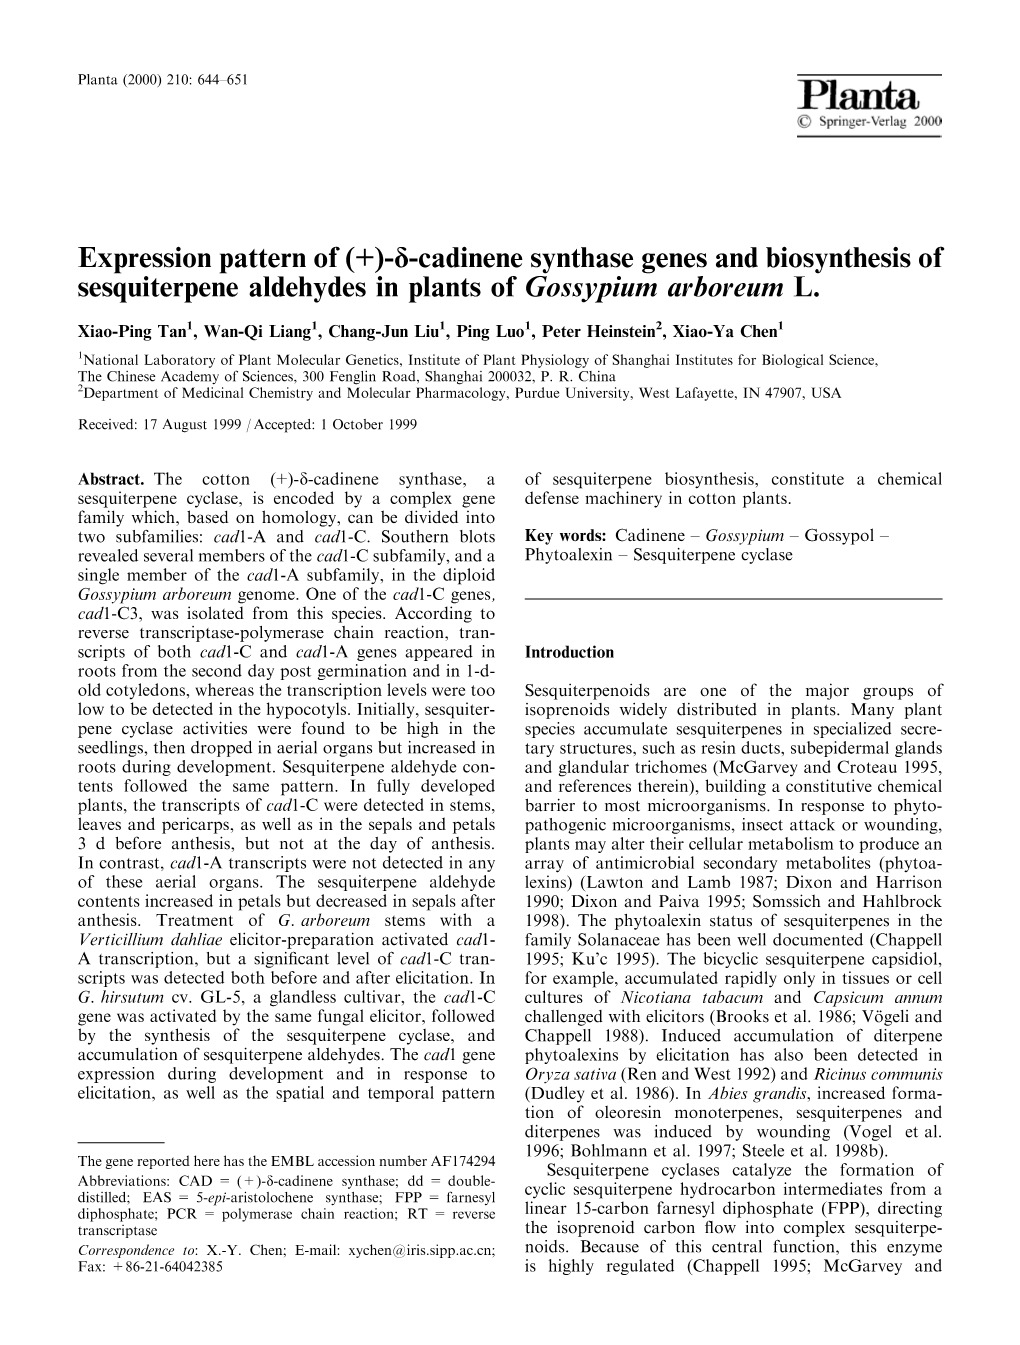 (+)-D-Cadinene Synthase Genes and Biosynthesis of Sesquiterpene Aldehydes in Plants of Gossypium Arboreum L